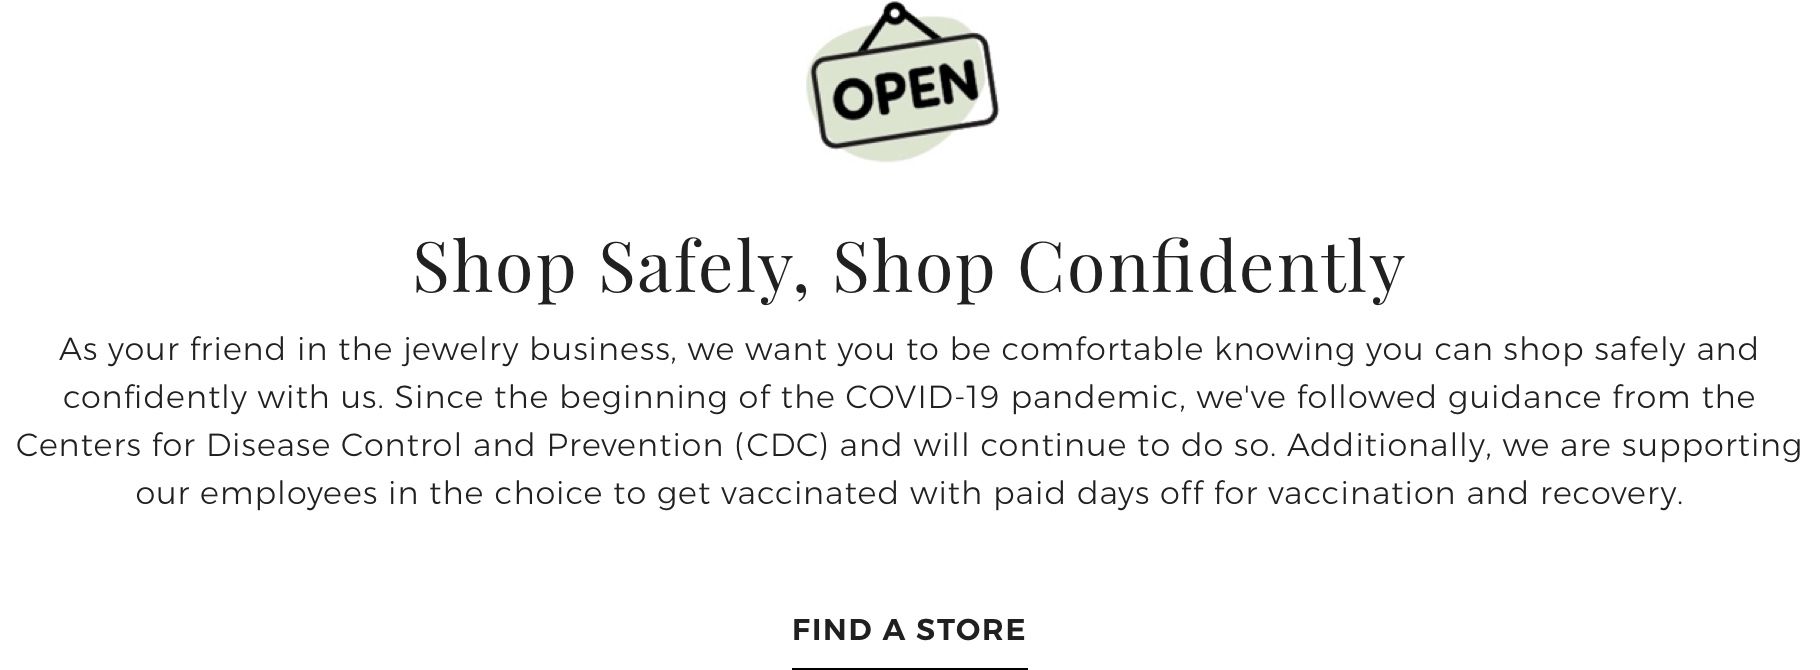 Shop Safely & Confidently